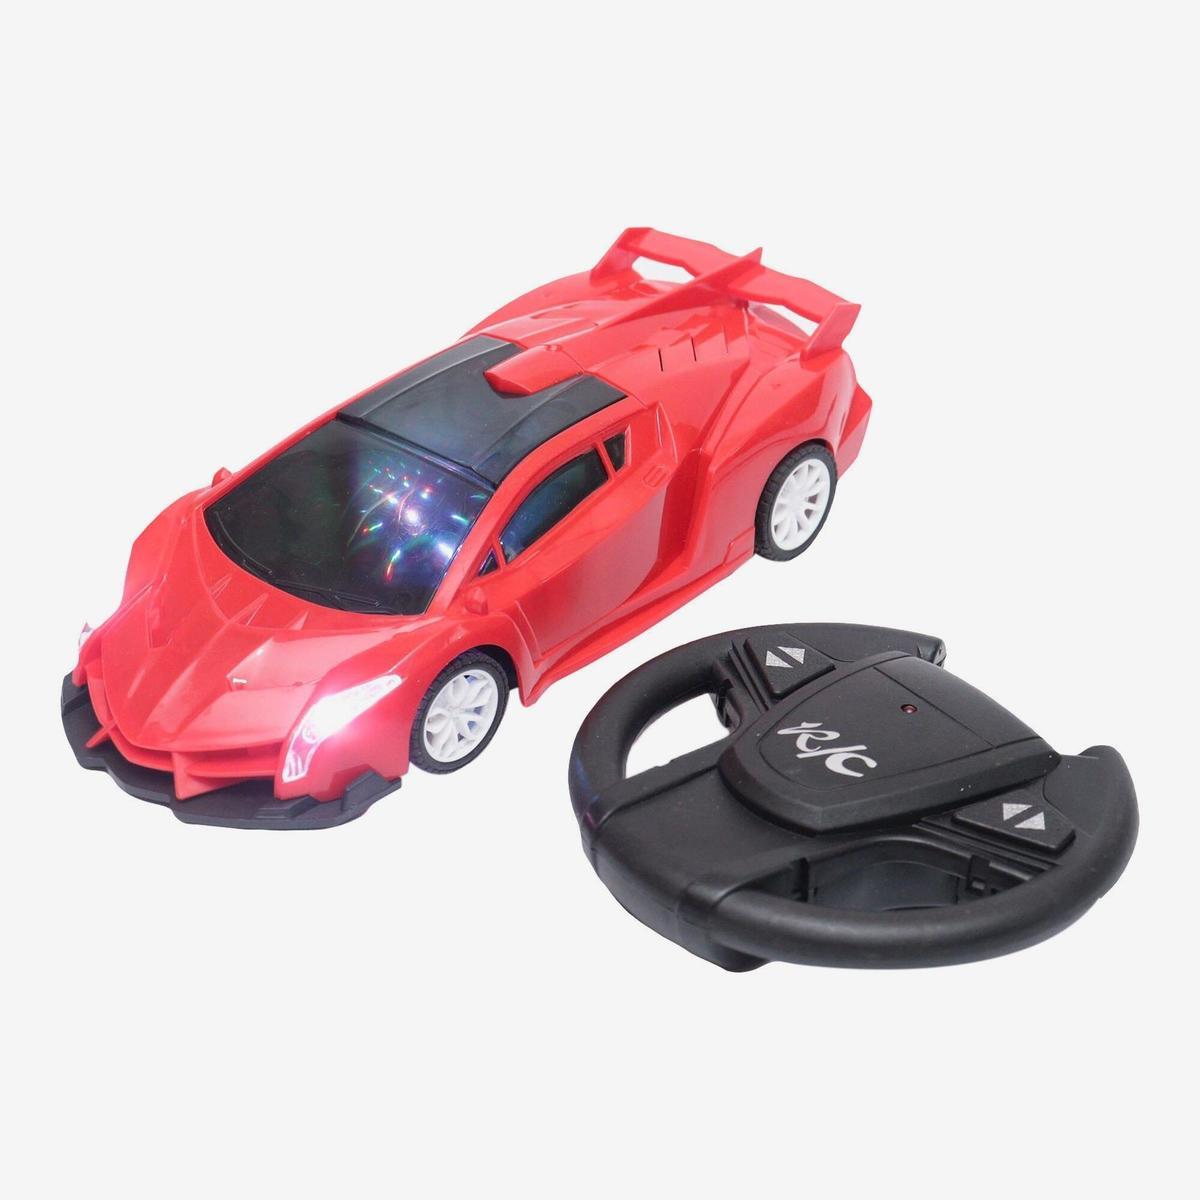 r c sports car remote control vechile toy